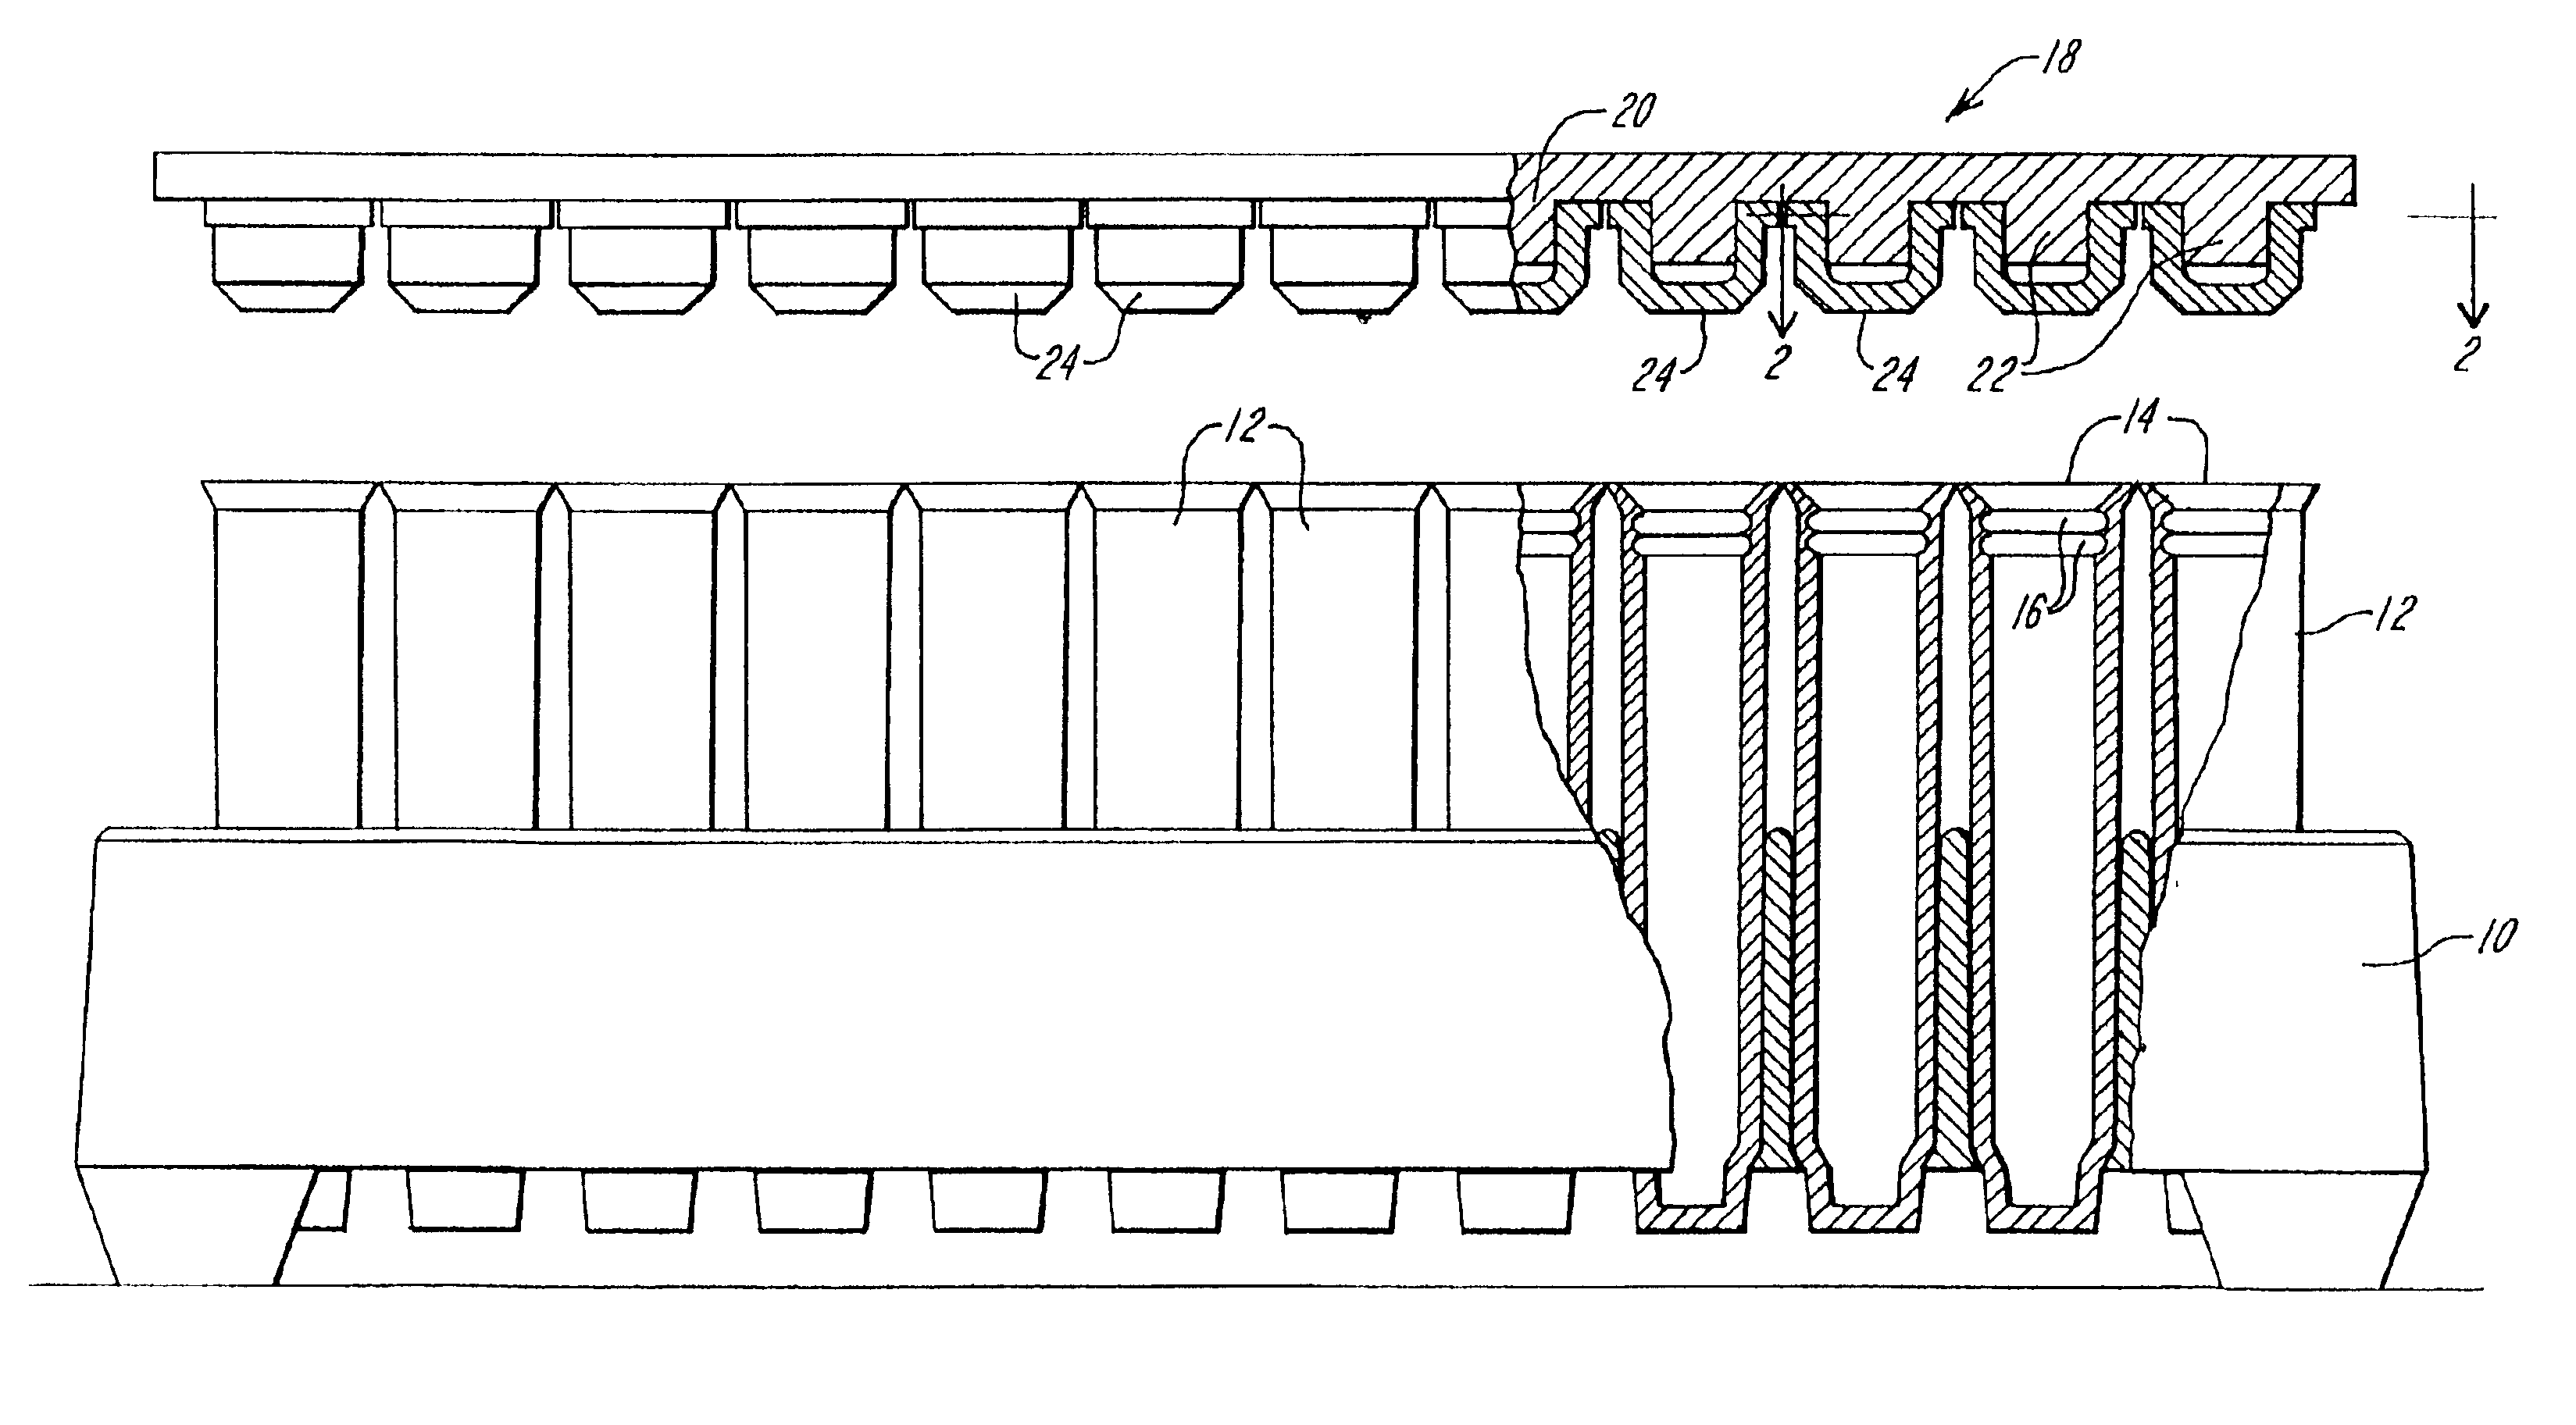 Apparatus for sealing test tubes and the like